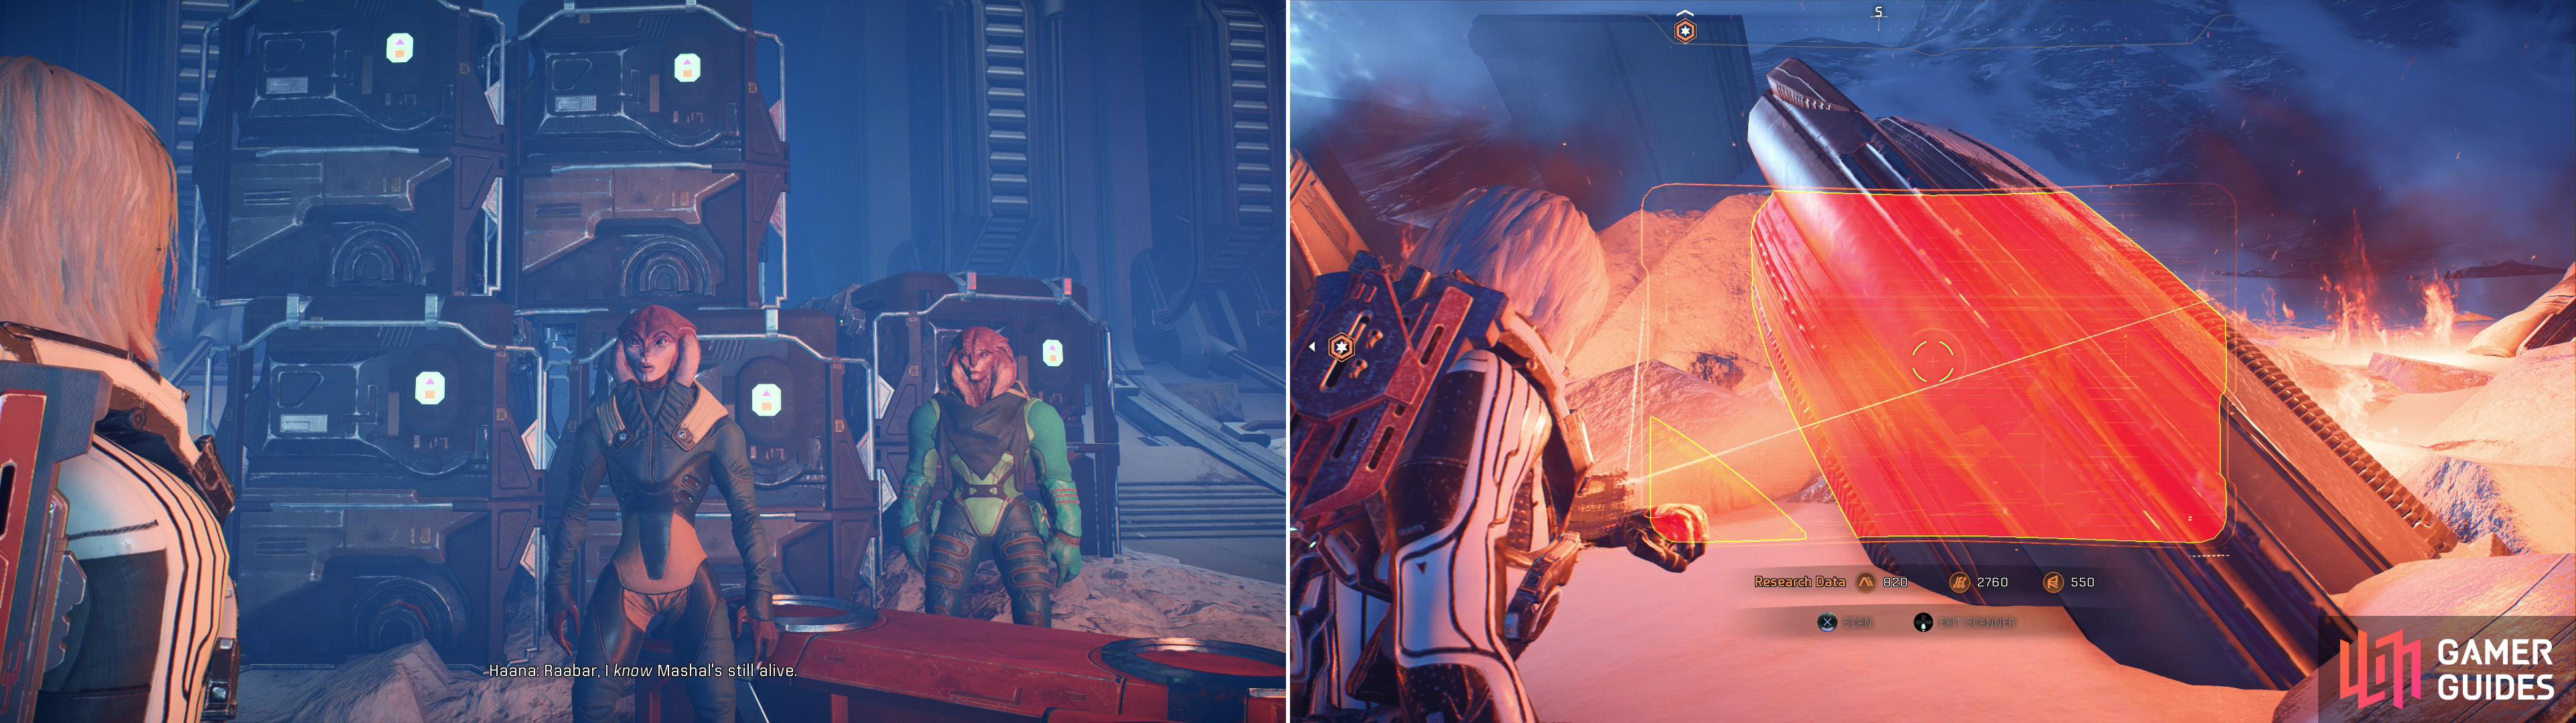 Talk to Haana at the Resistance Base to find out about her friend Mashal (left), then scan the ruins of the weapon's depot she destroyed (right).